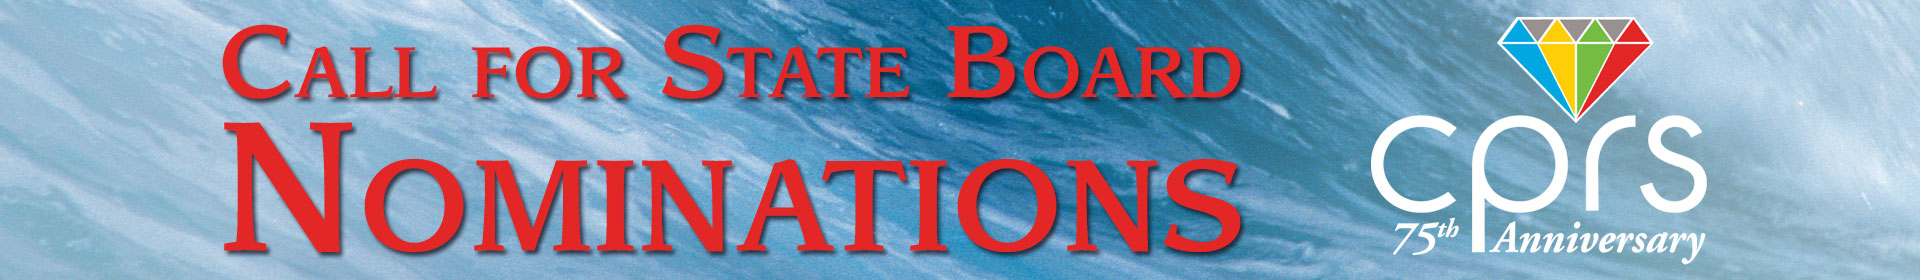 Call for State Board Nominations